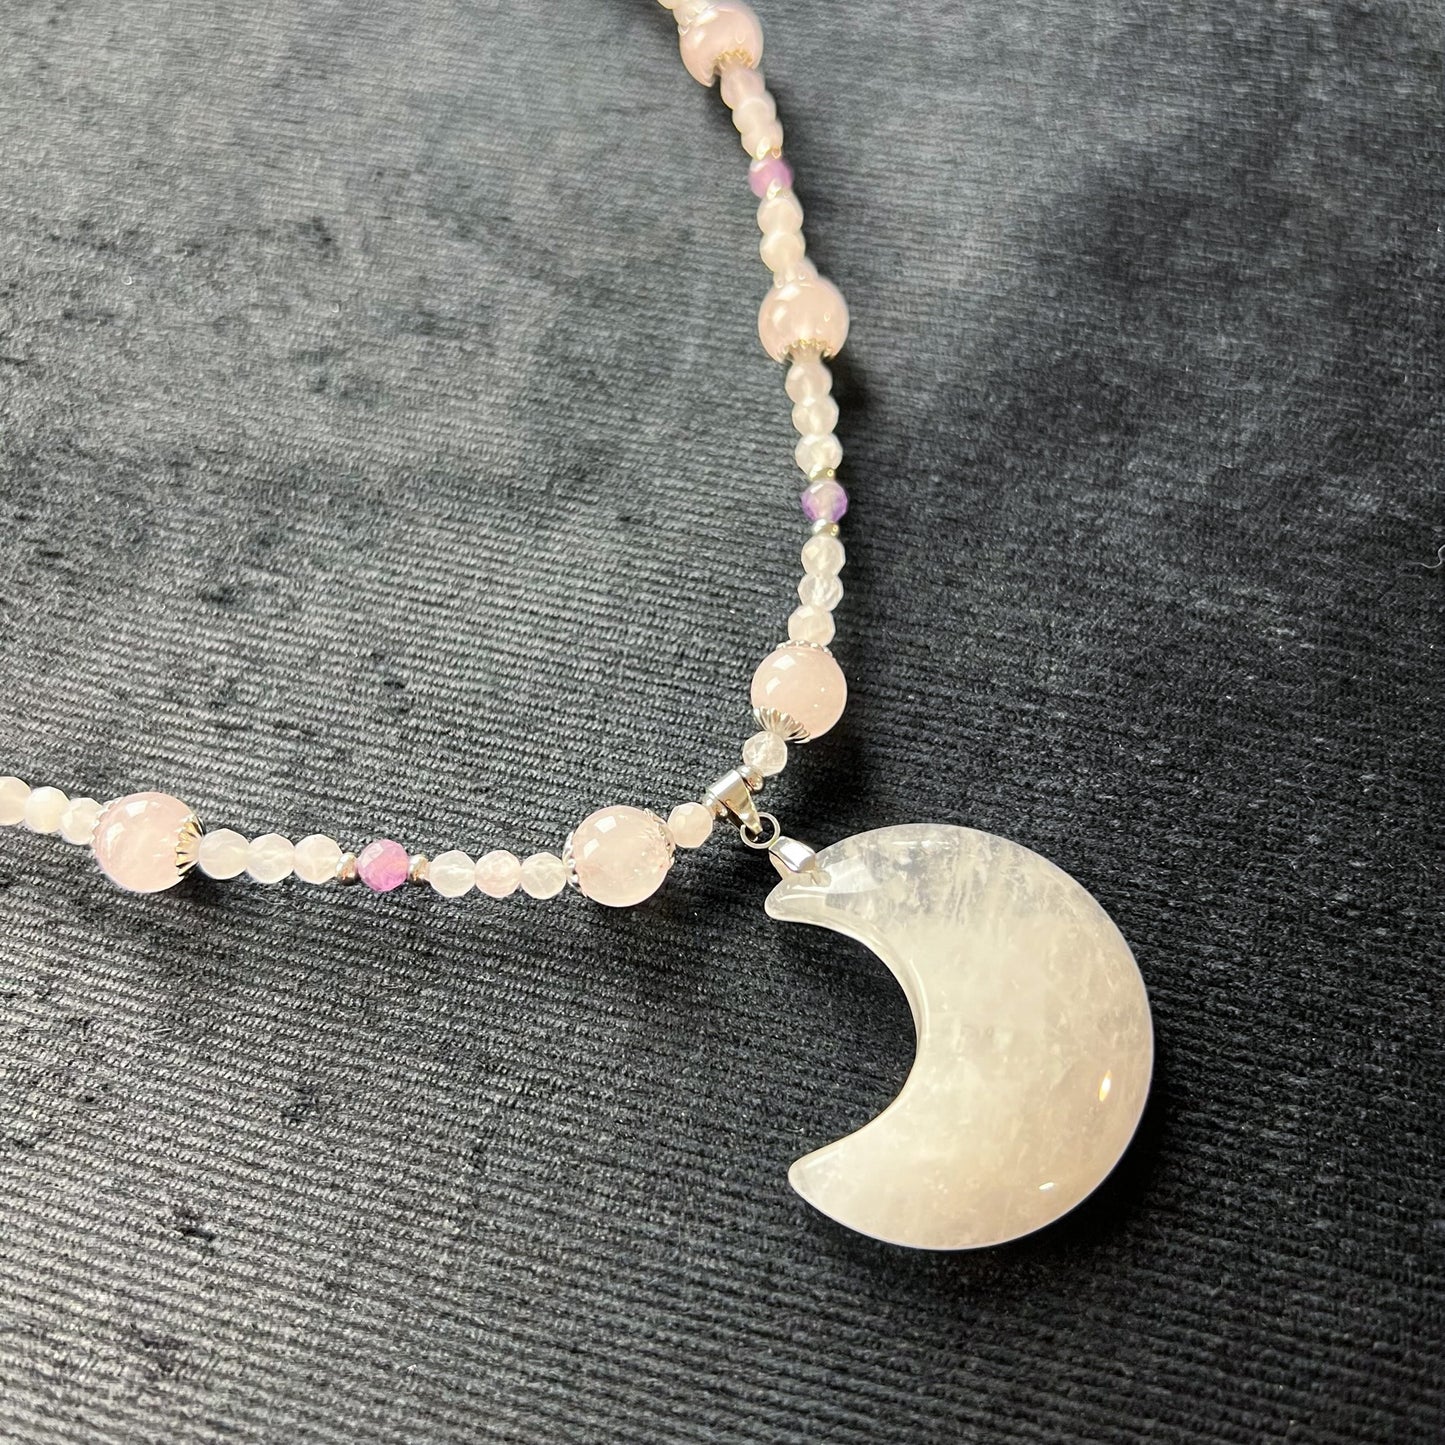 Gemstone necklace quartz moon crescent amethyst and rose quartz beads stainless steel Rêveries Collection fantasy fairy necklace